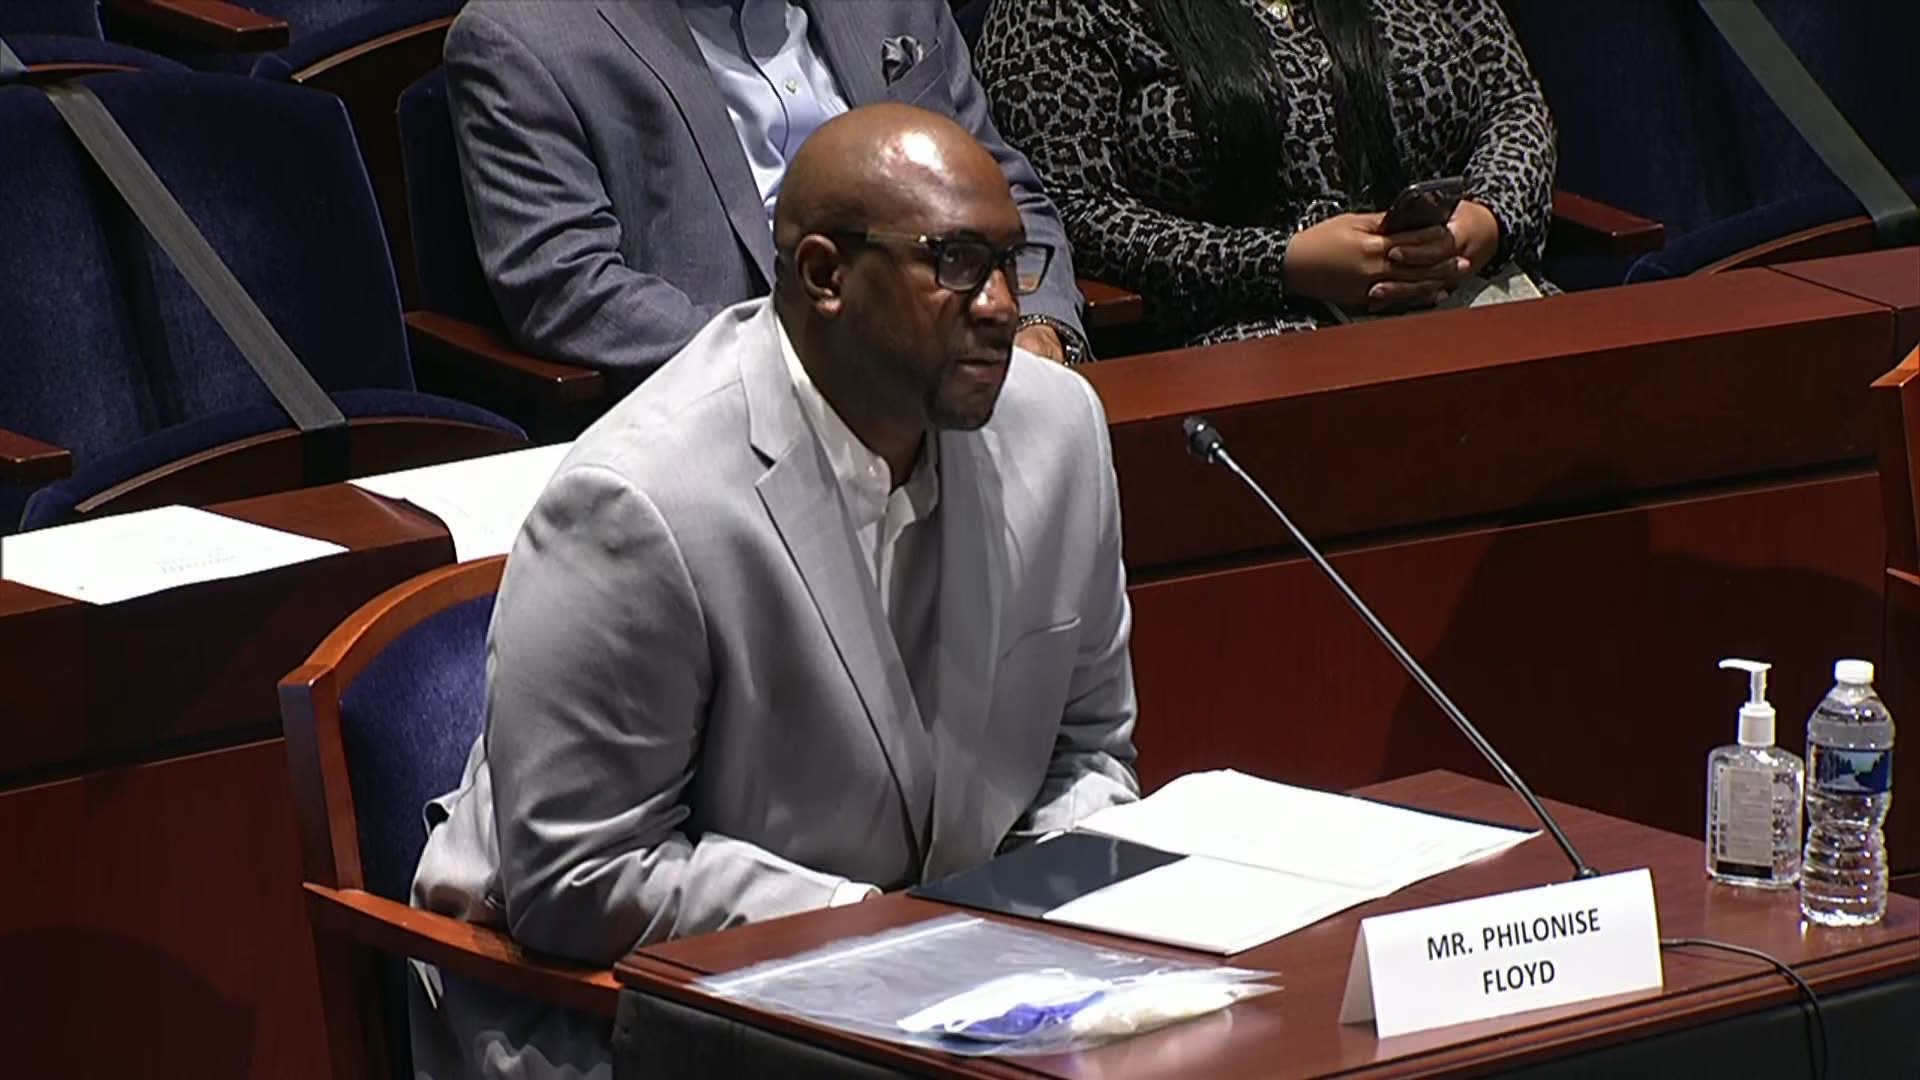 Philonise, George Floyd's brother, testified to the House Judiciary Committee that's examining the crisis of racial profiling and police brutality.